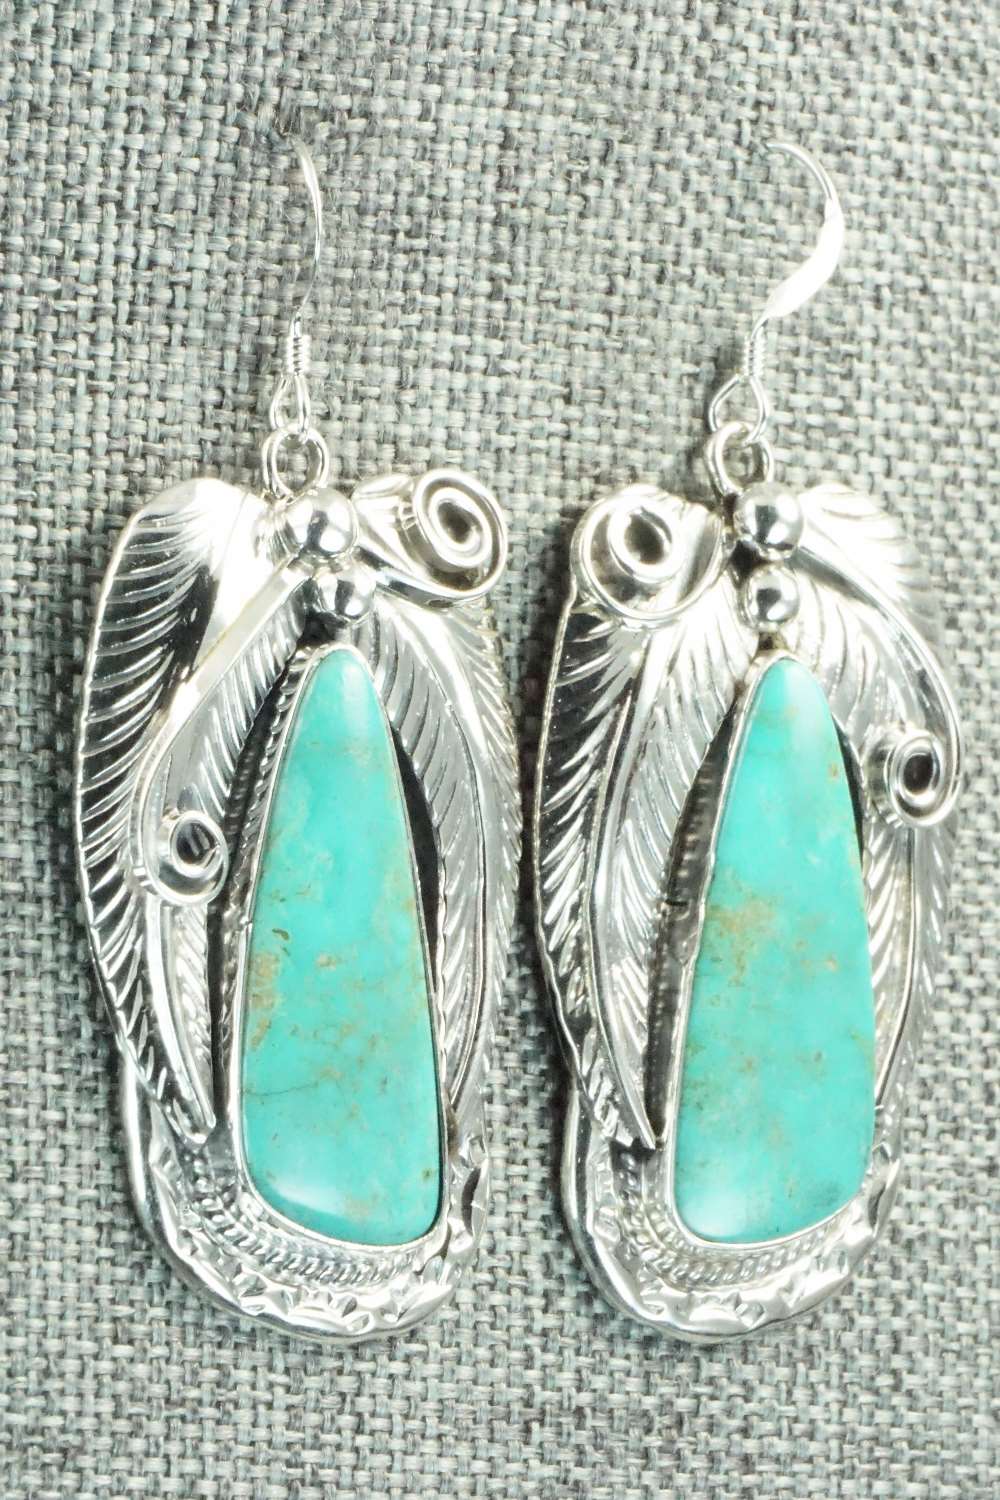 Turquoise & Sterling Silver Earrings - Davey Morgan